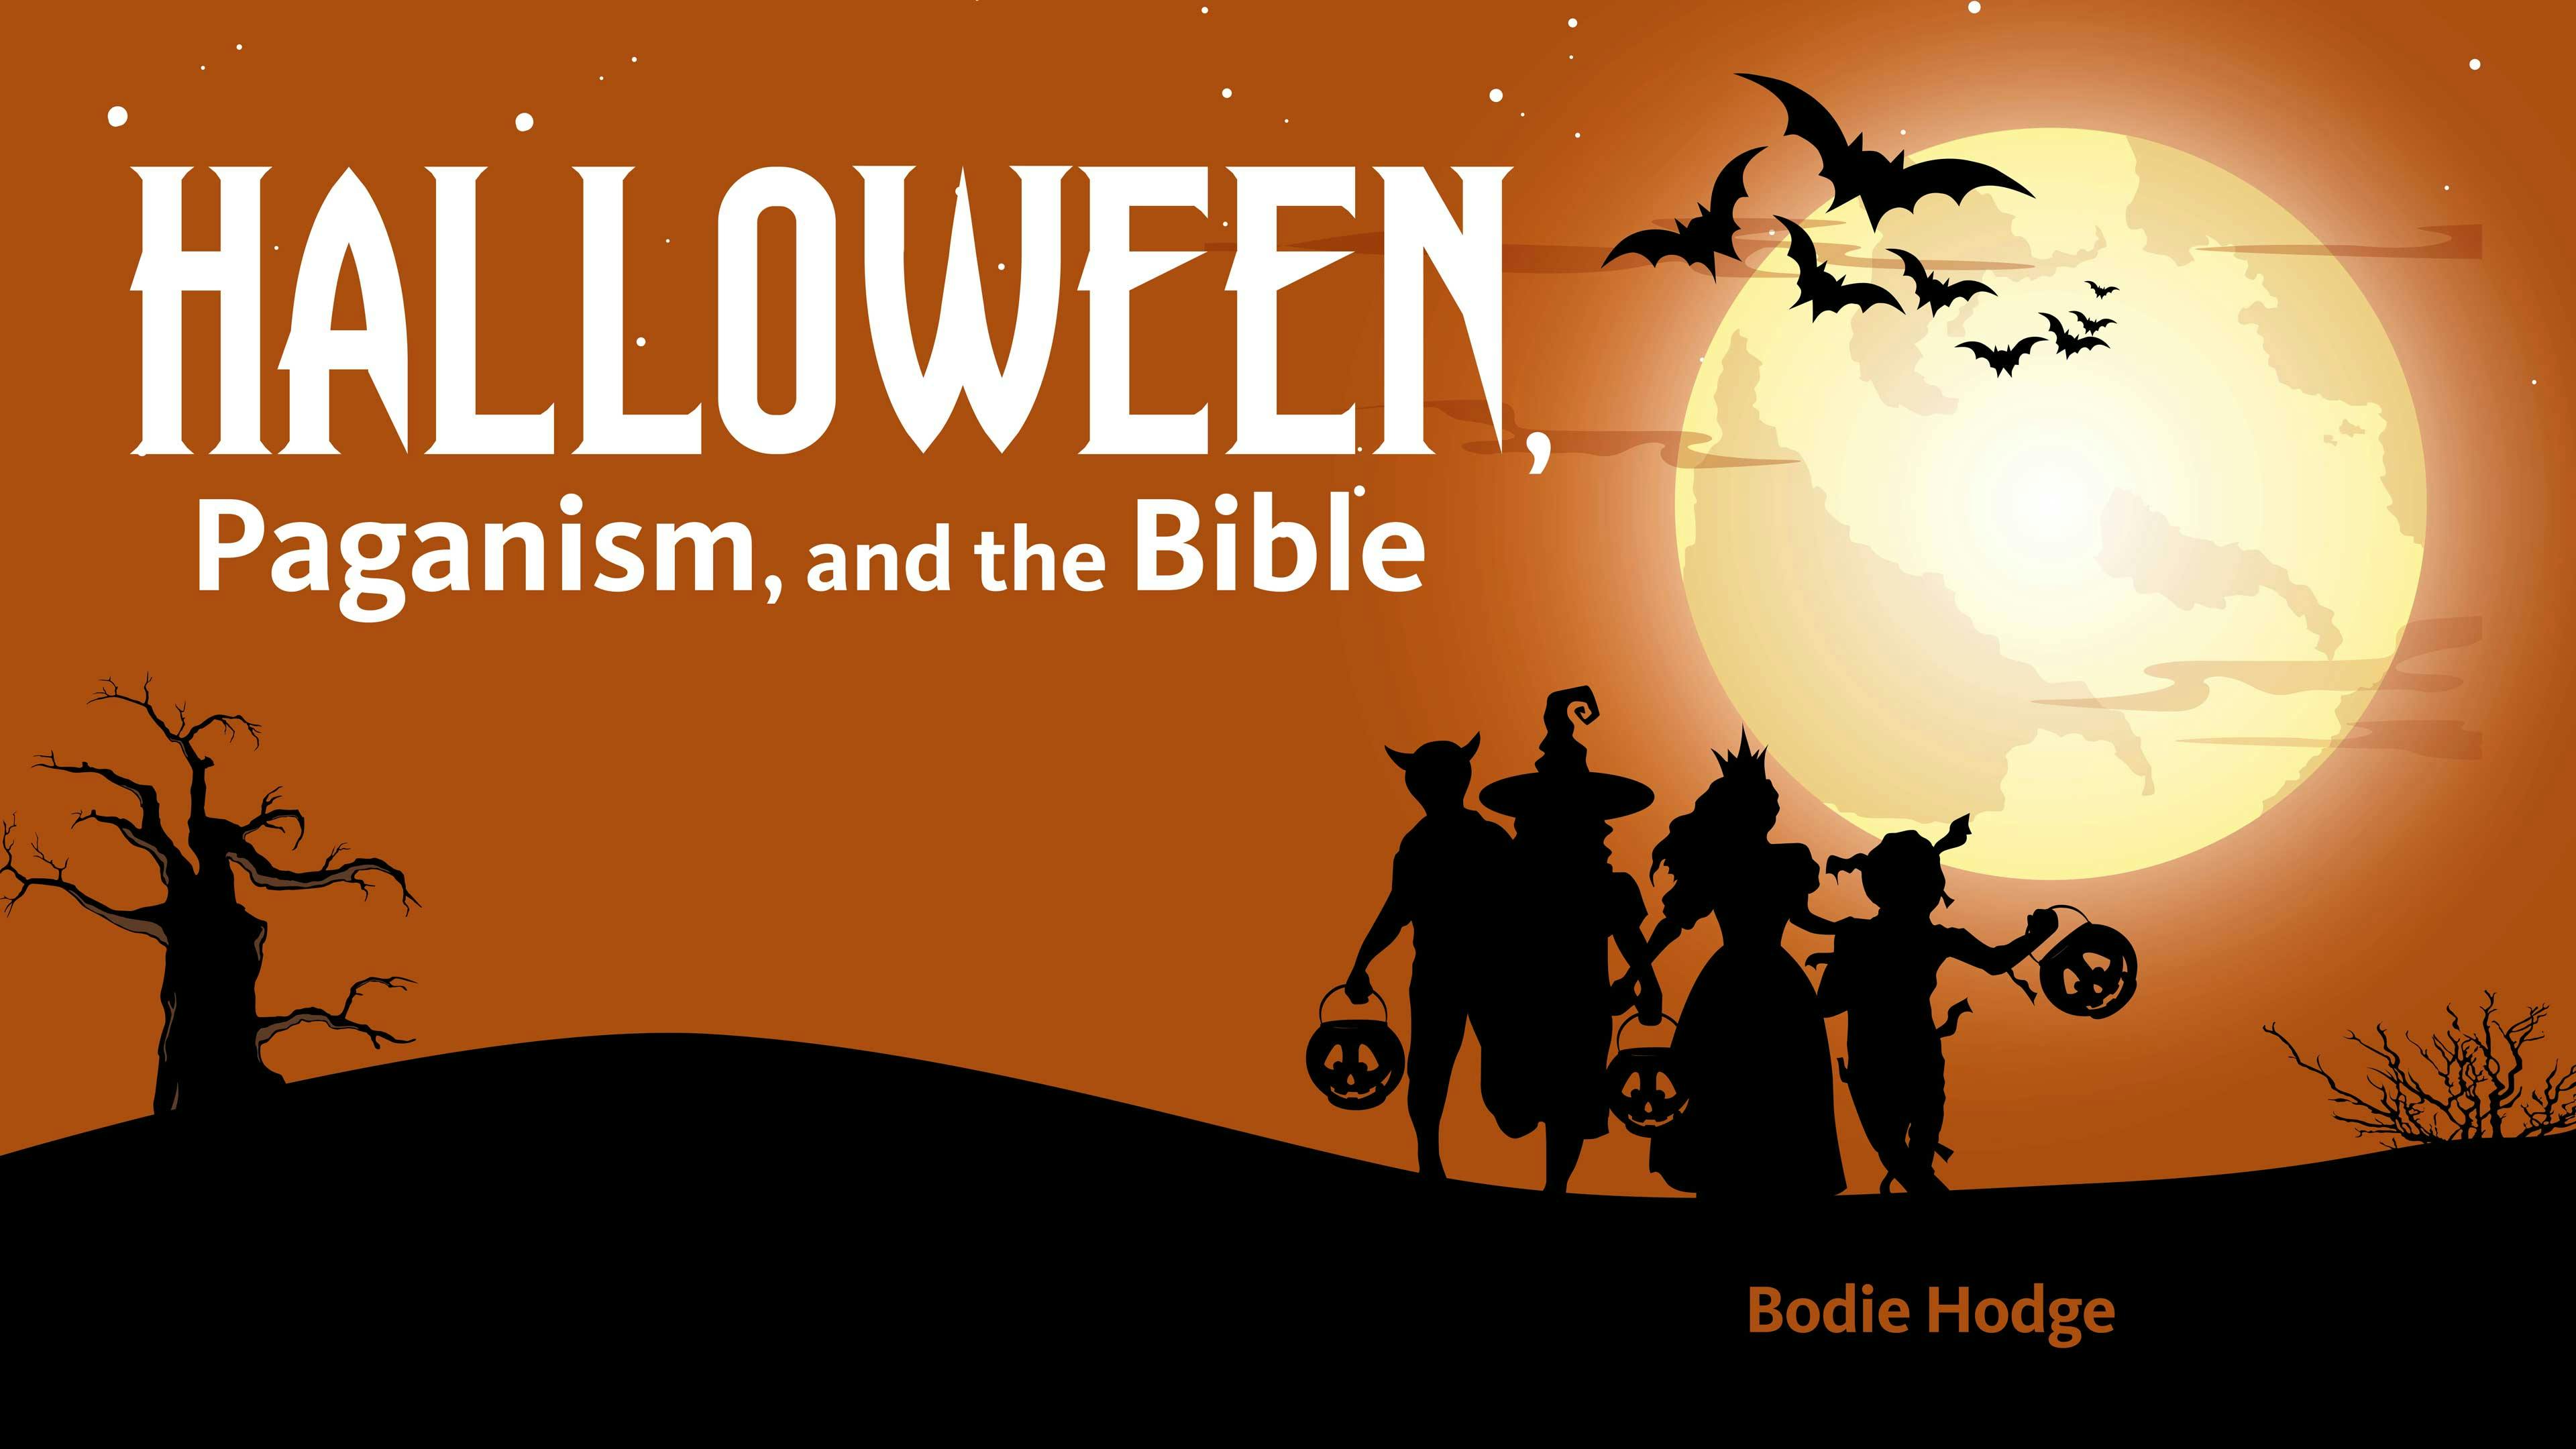 Halloween, Paganism, and the Bible - Apologetics with Bodie Hodge - Answers.tv